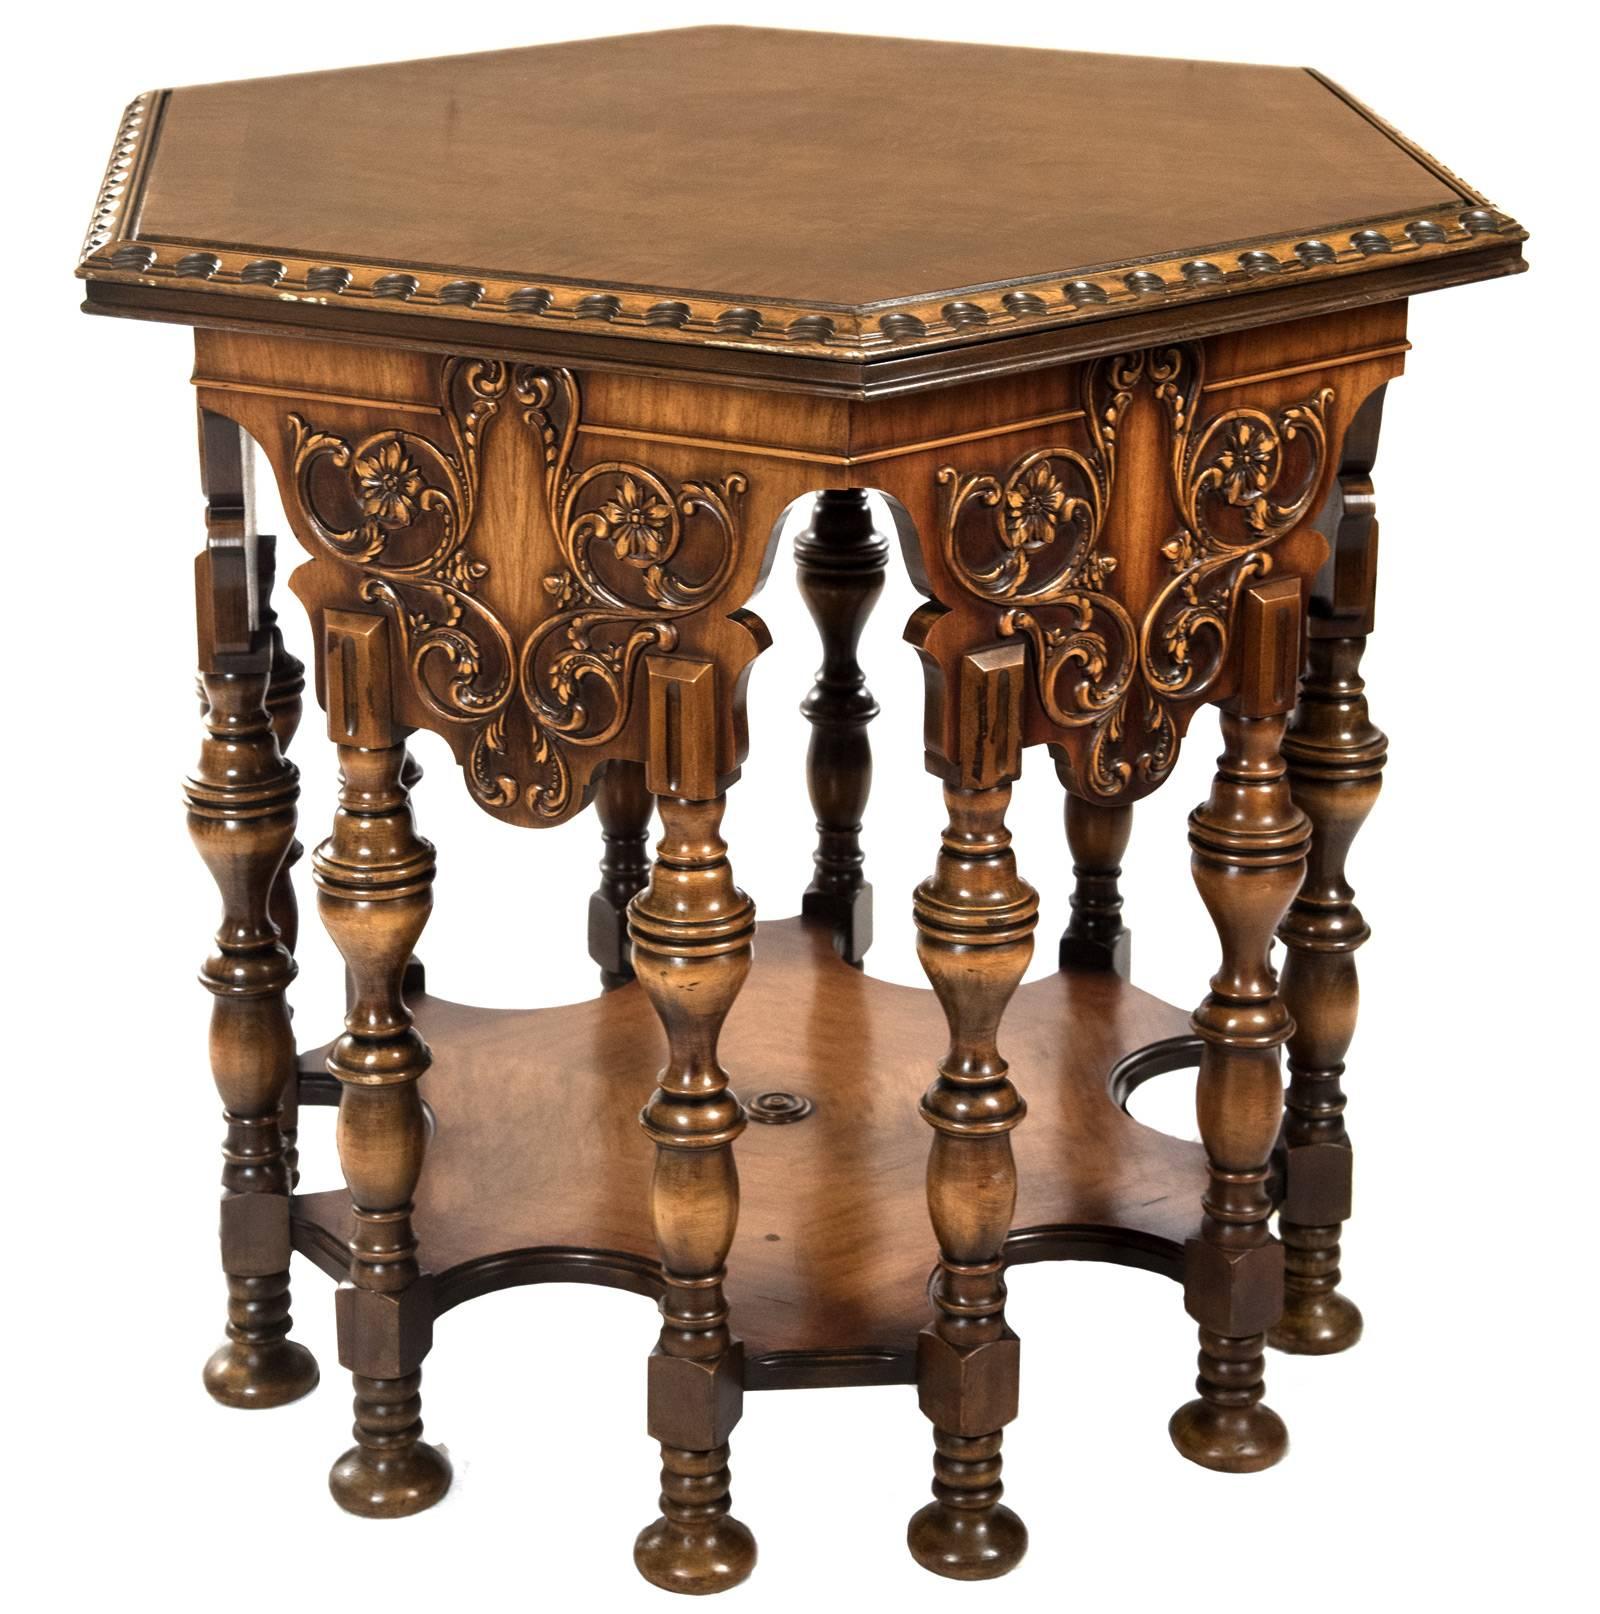 A side table of hexagon form with a banded burled top with scalloped stepped edges above floral carved aprons that are each supported by carved and turned sets of legs with bun feet and which are all joined by a six-edged scalloped shelf.